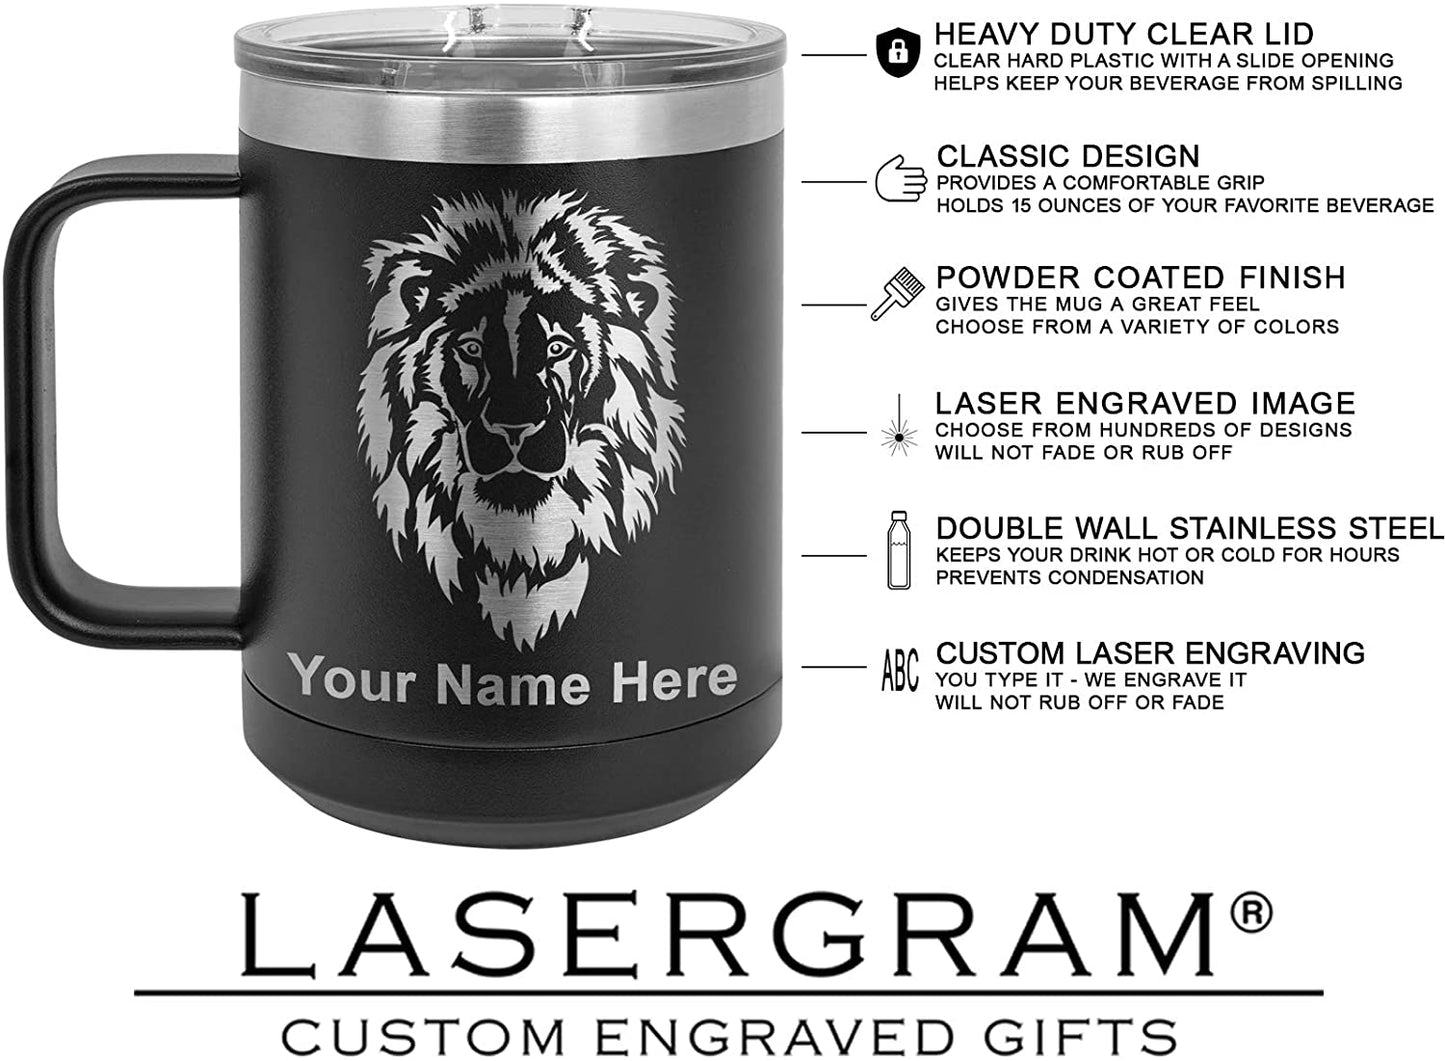 15oz Vacuum Insulated Coffee Mug, PT Physical Therapist, Personalized Engraving Included